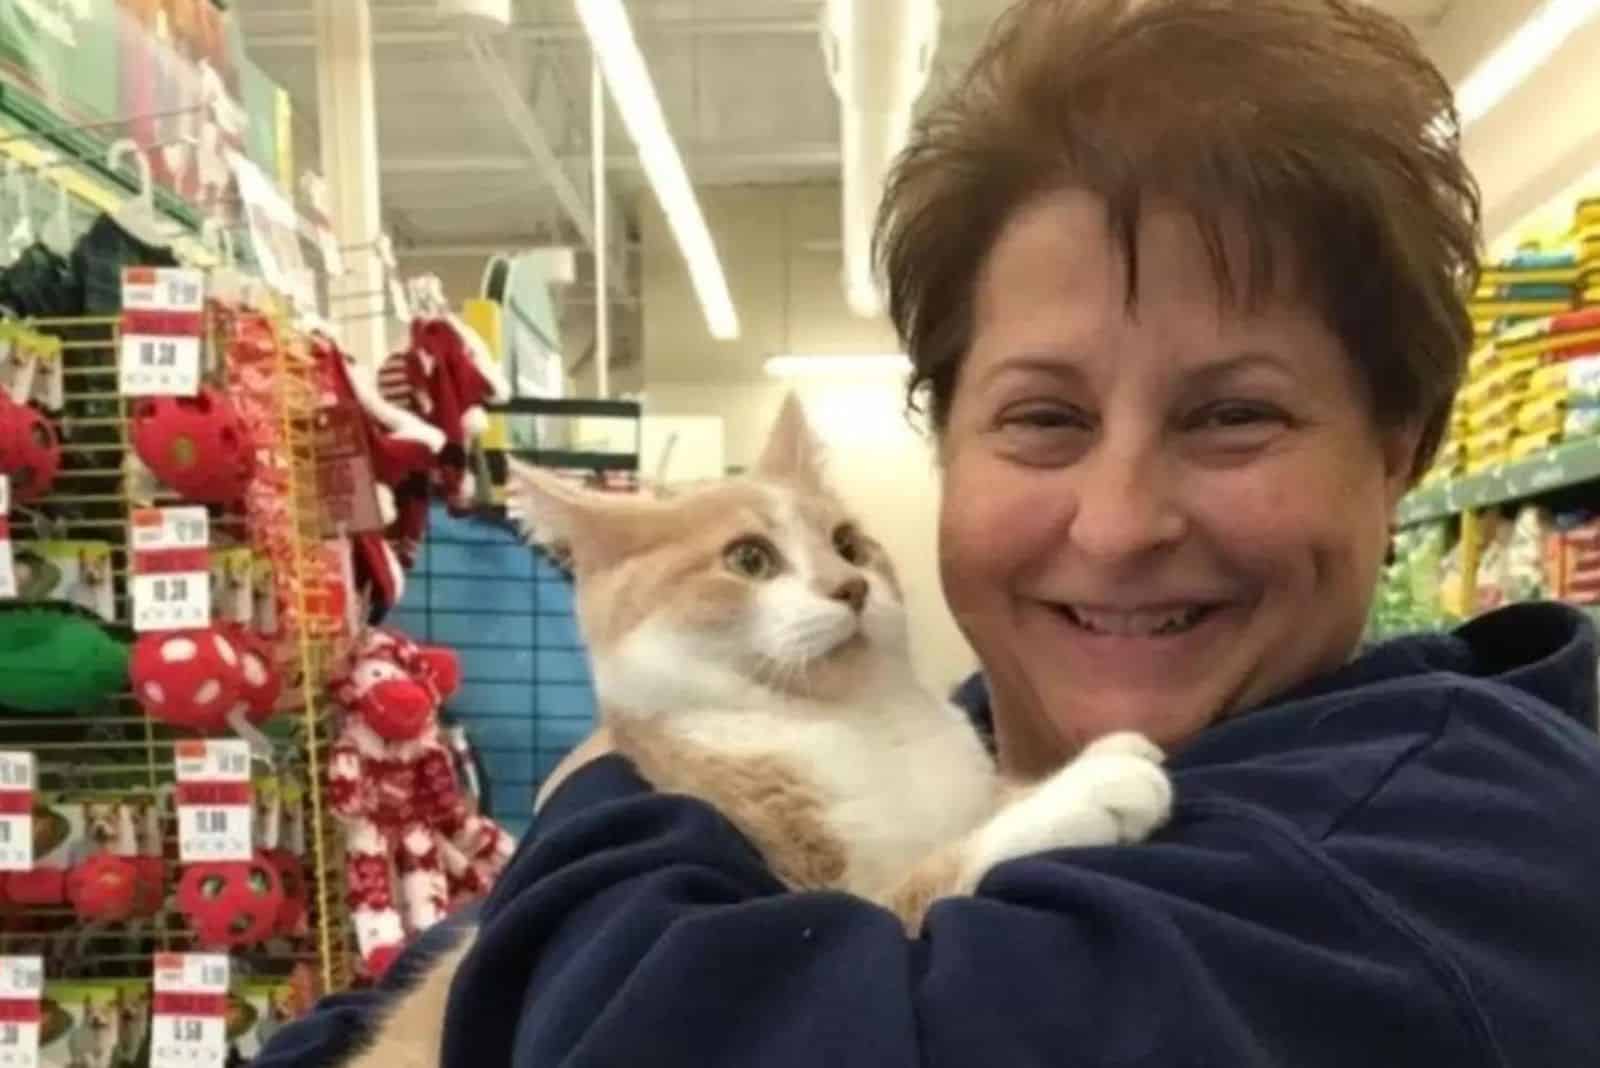 happy woman holding a cat